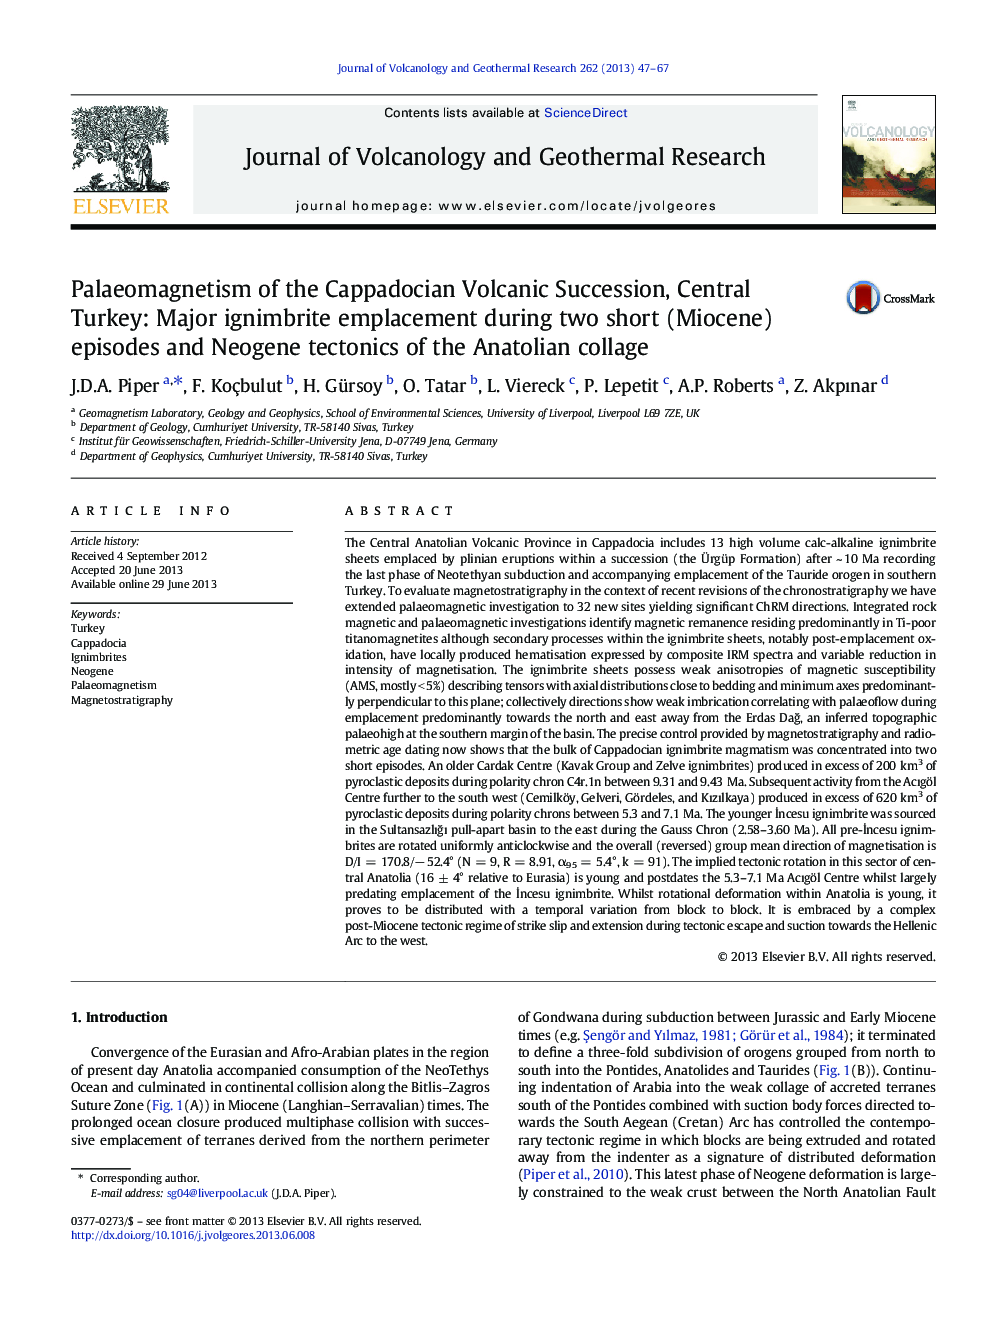 Palaeomagnetism of the Cappadocian Volcanic Succession, Central Turkey: Major ignimbrite emplacement during two short (Miocene) episodes and Neogene tectonics of the Anatolian collage